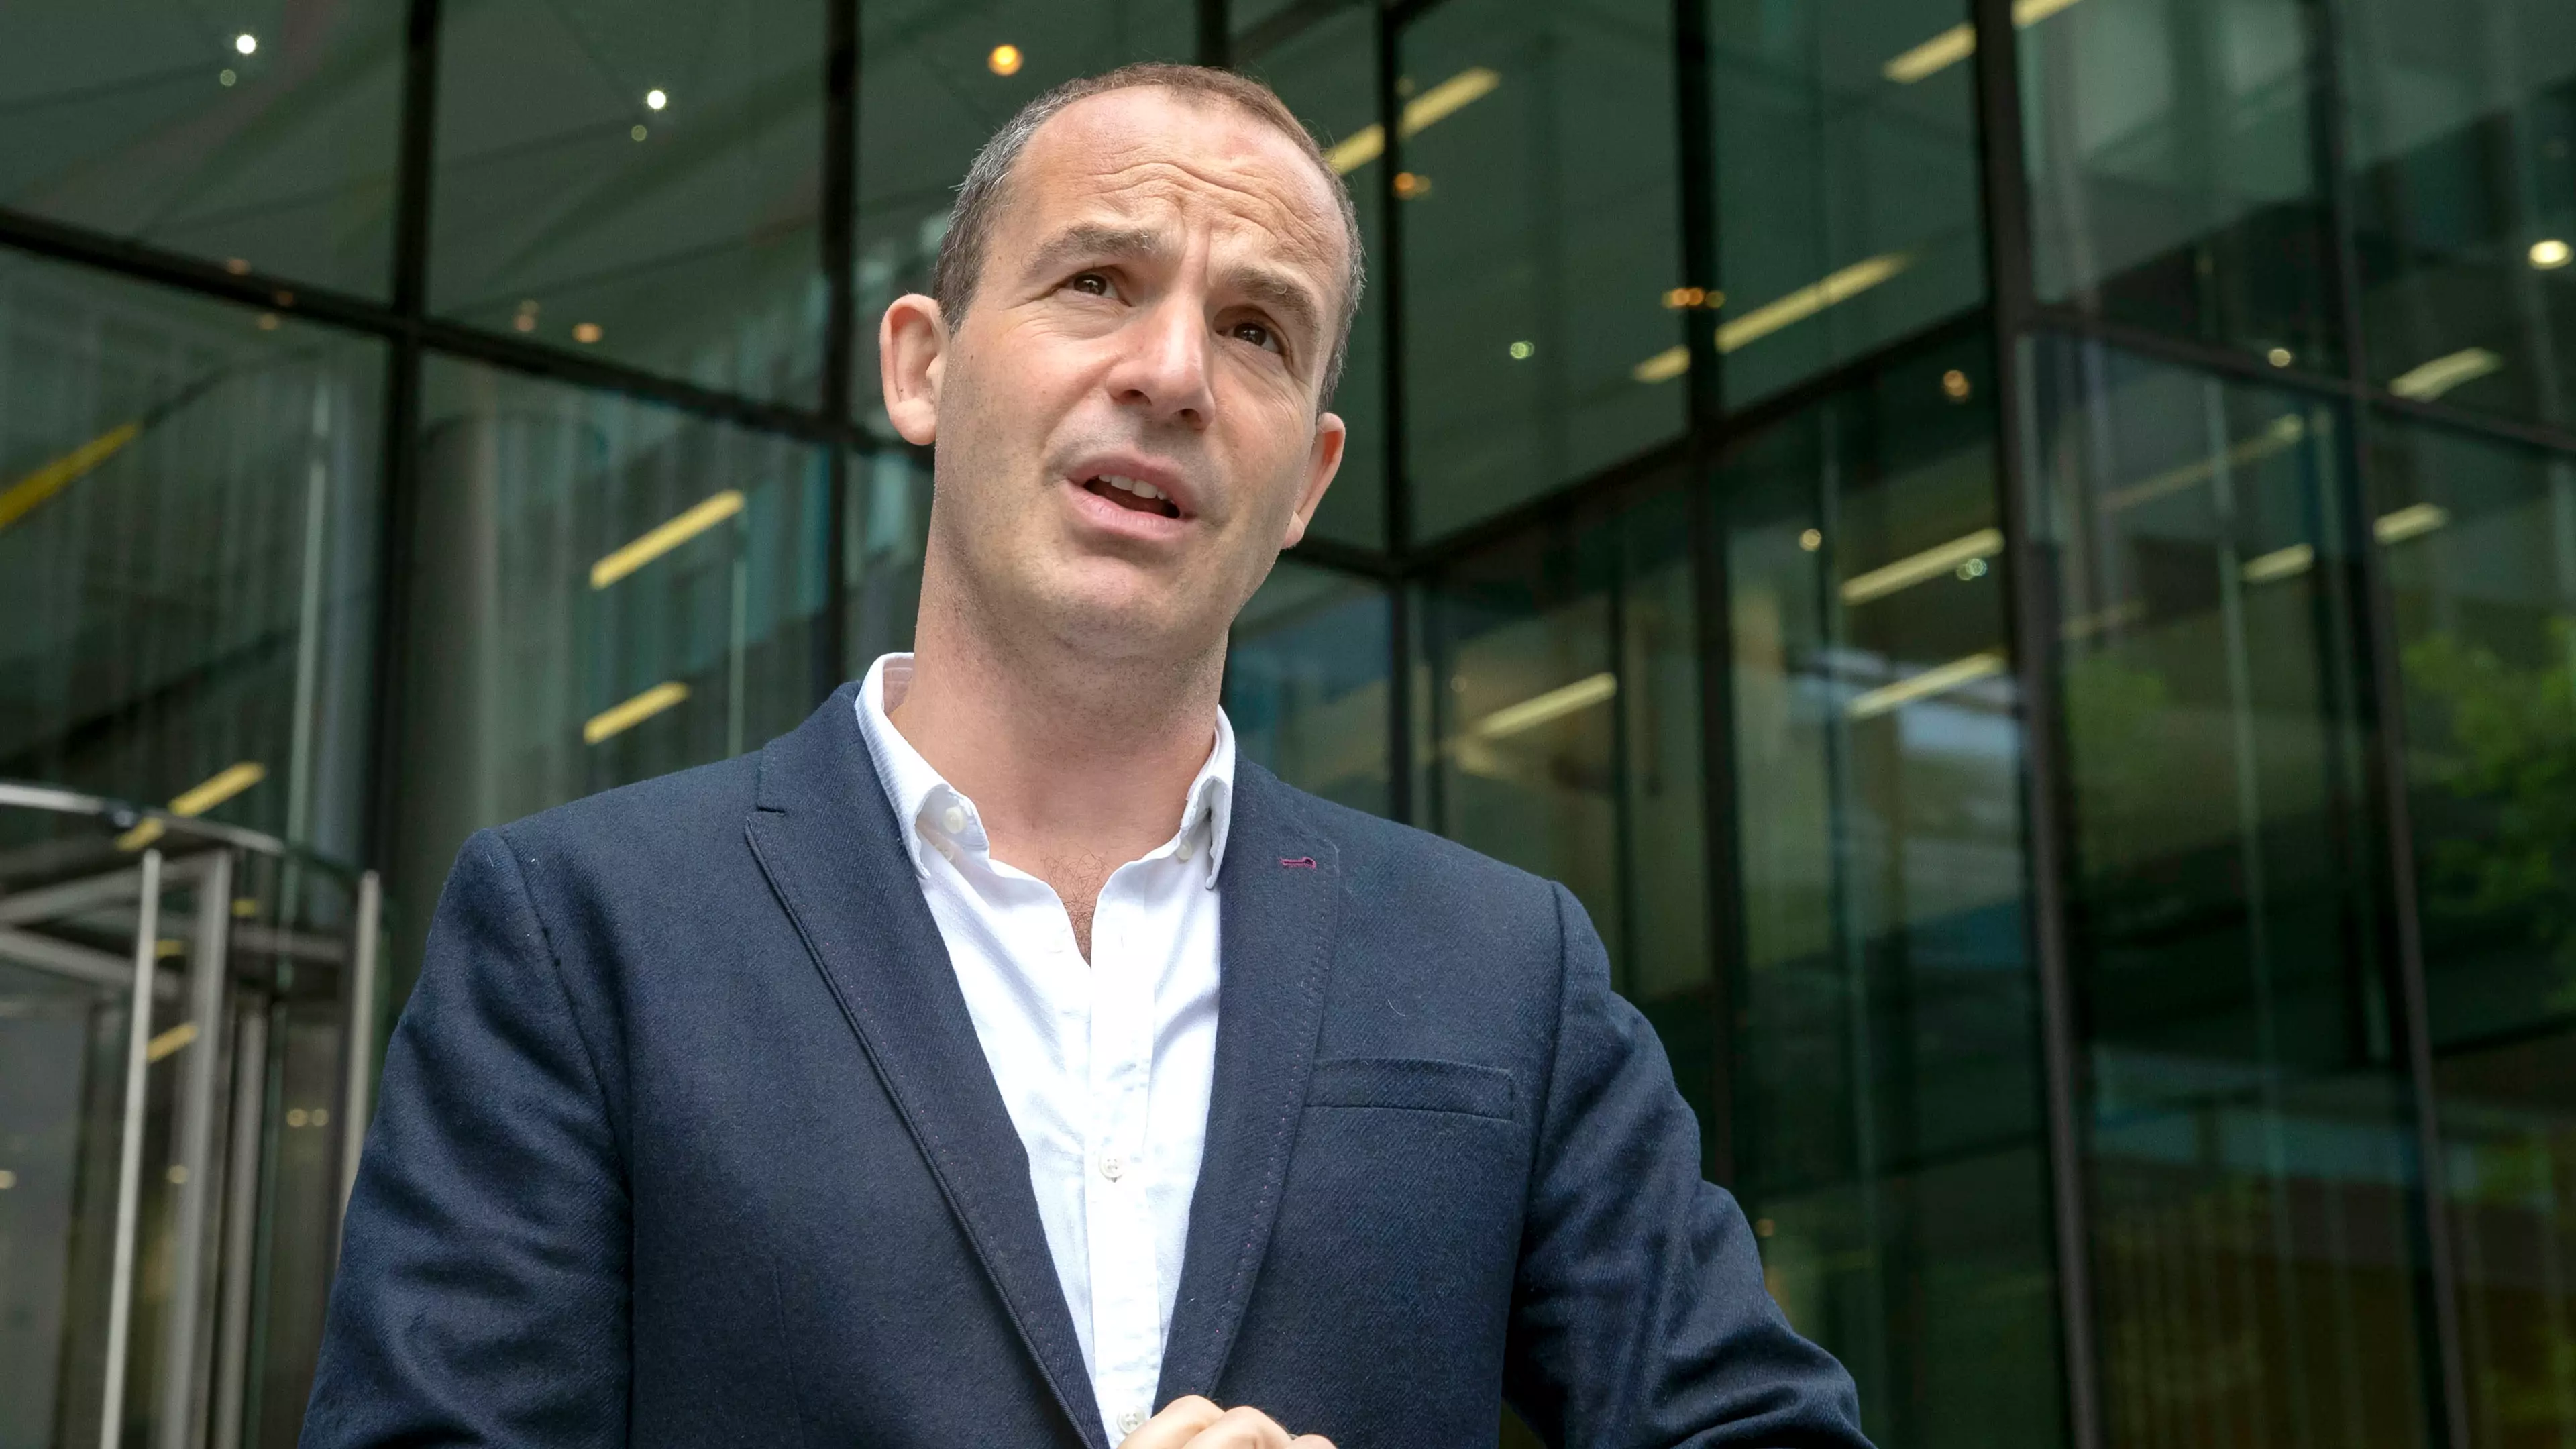 Martin Lewis Finds That 100,000 Brits Could Claim Back Overpaid Student Loans